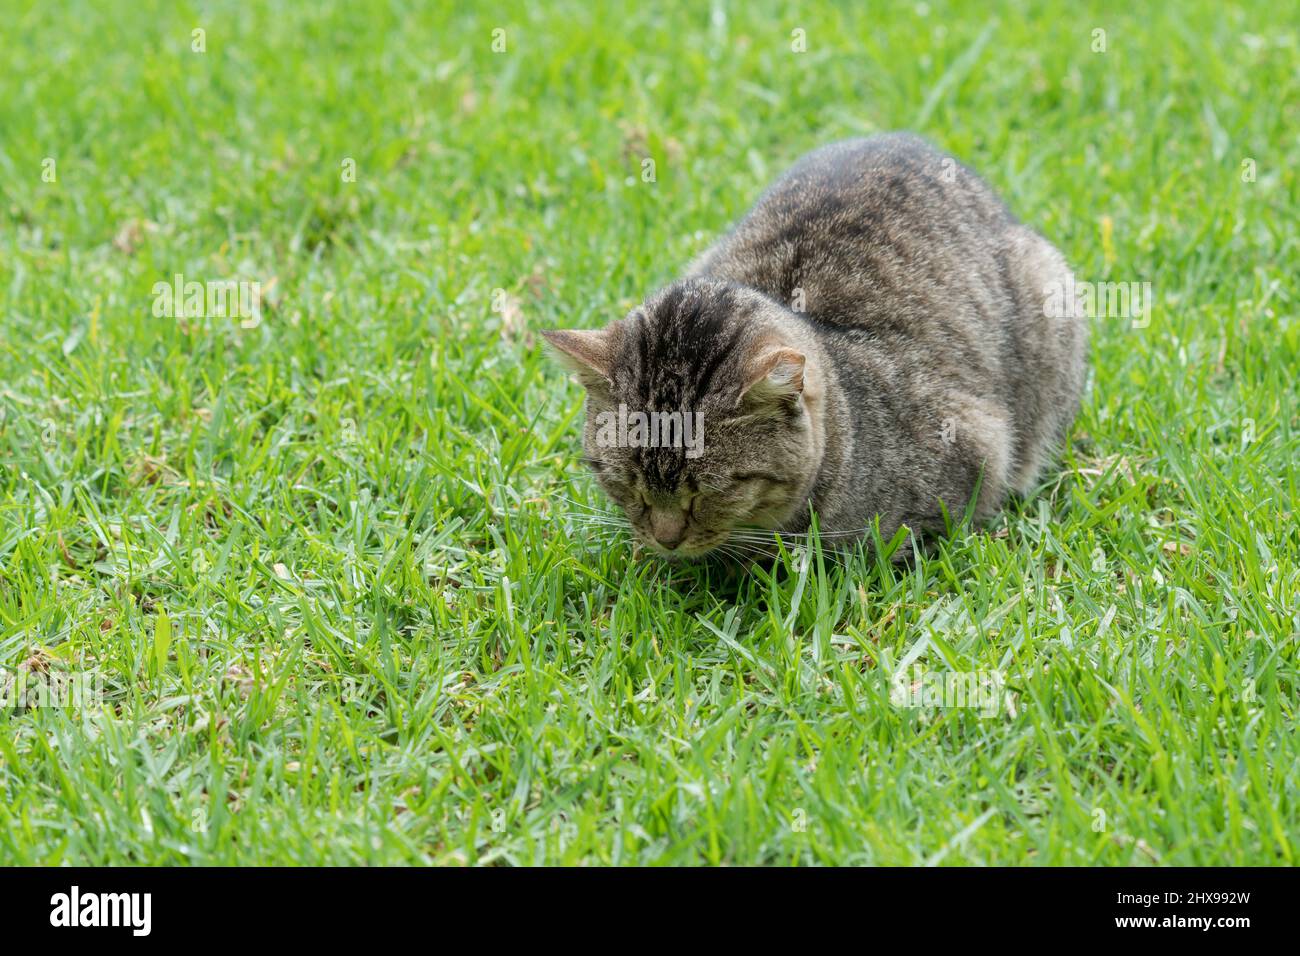 Tabby cat curled up and sleeping with its eyes closed on a green grass lawn Stock Photo